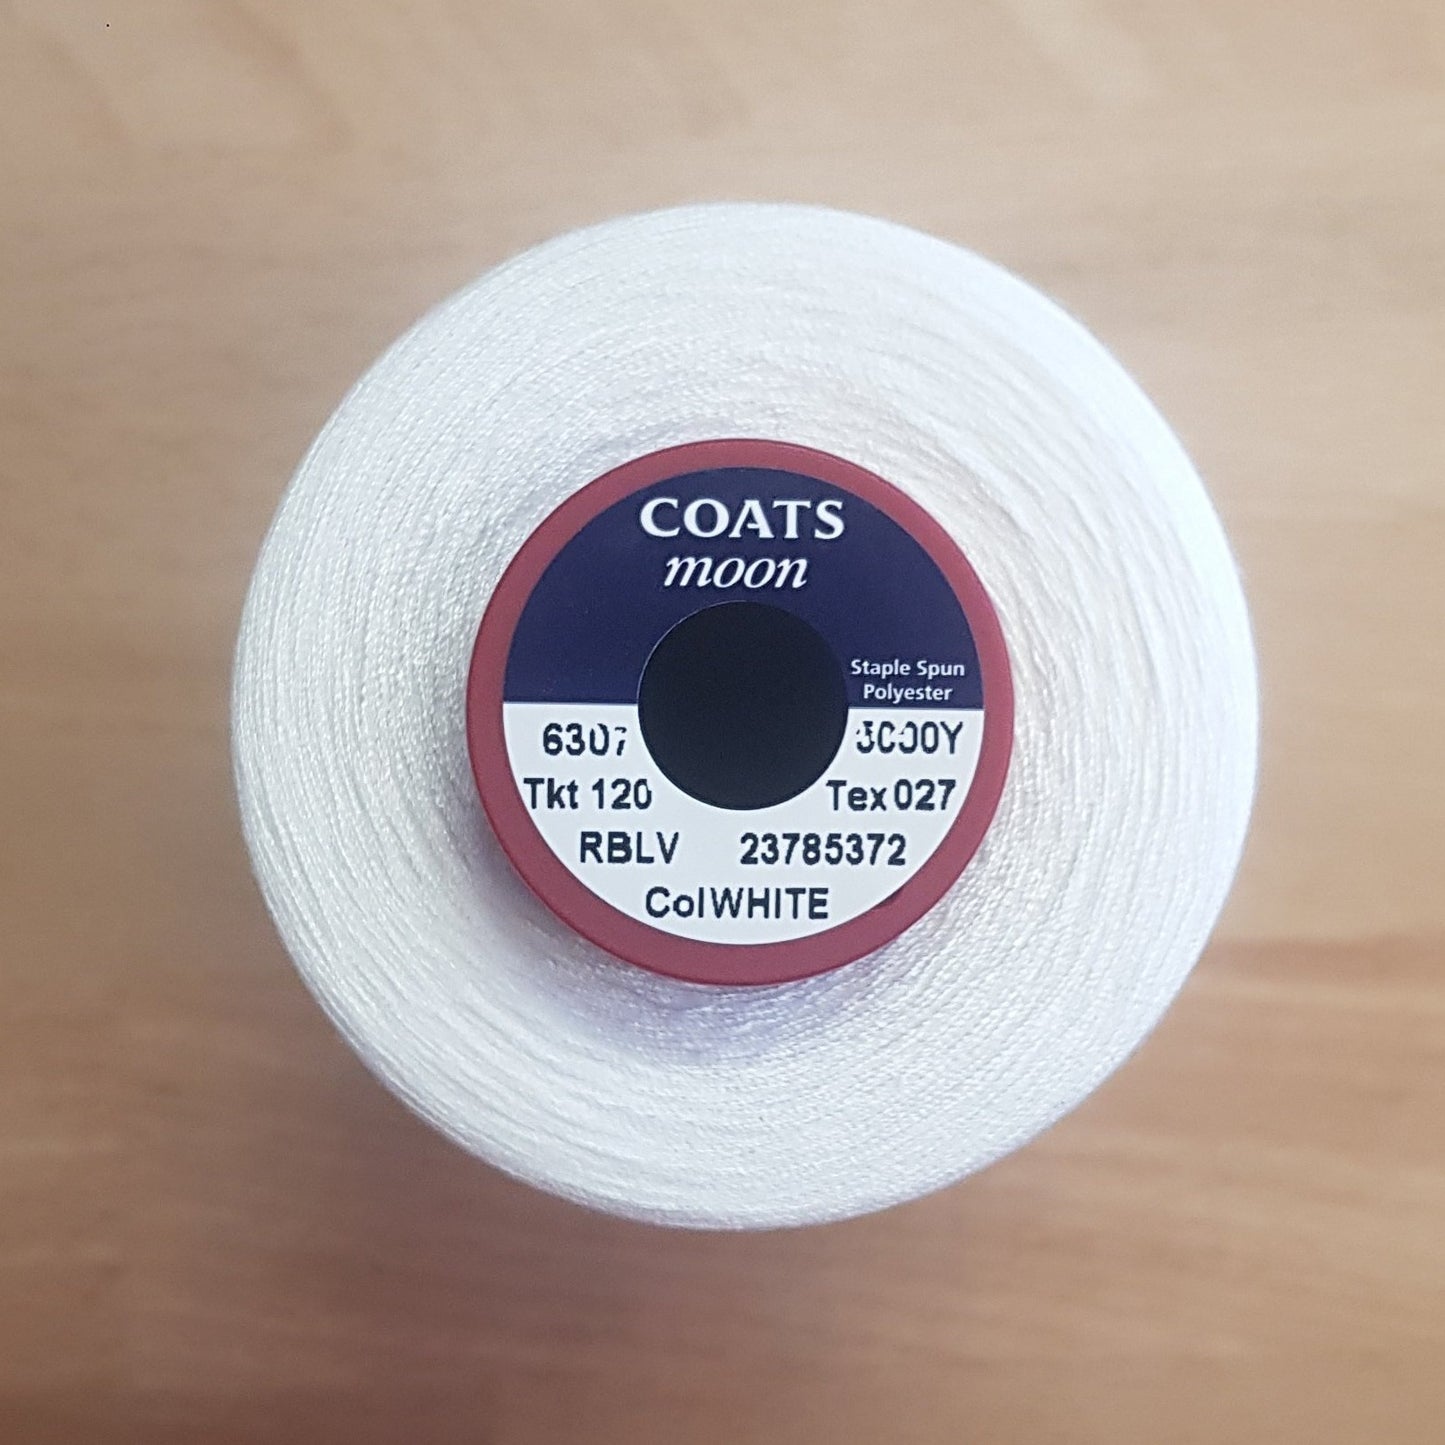 Coats Moon 100% Polyester Thread Cones TKT 120 5000yd/4572m - Various Colours